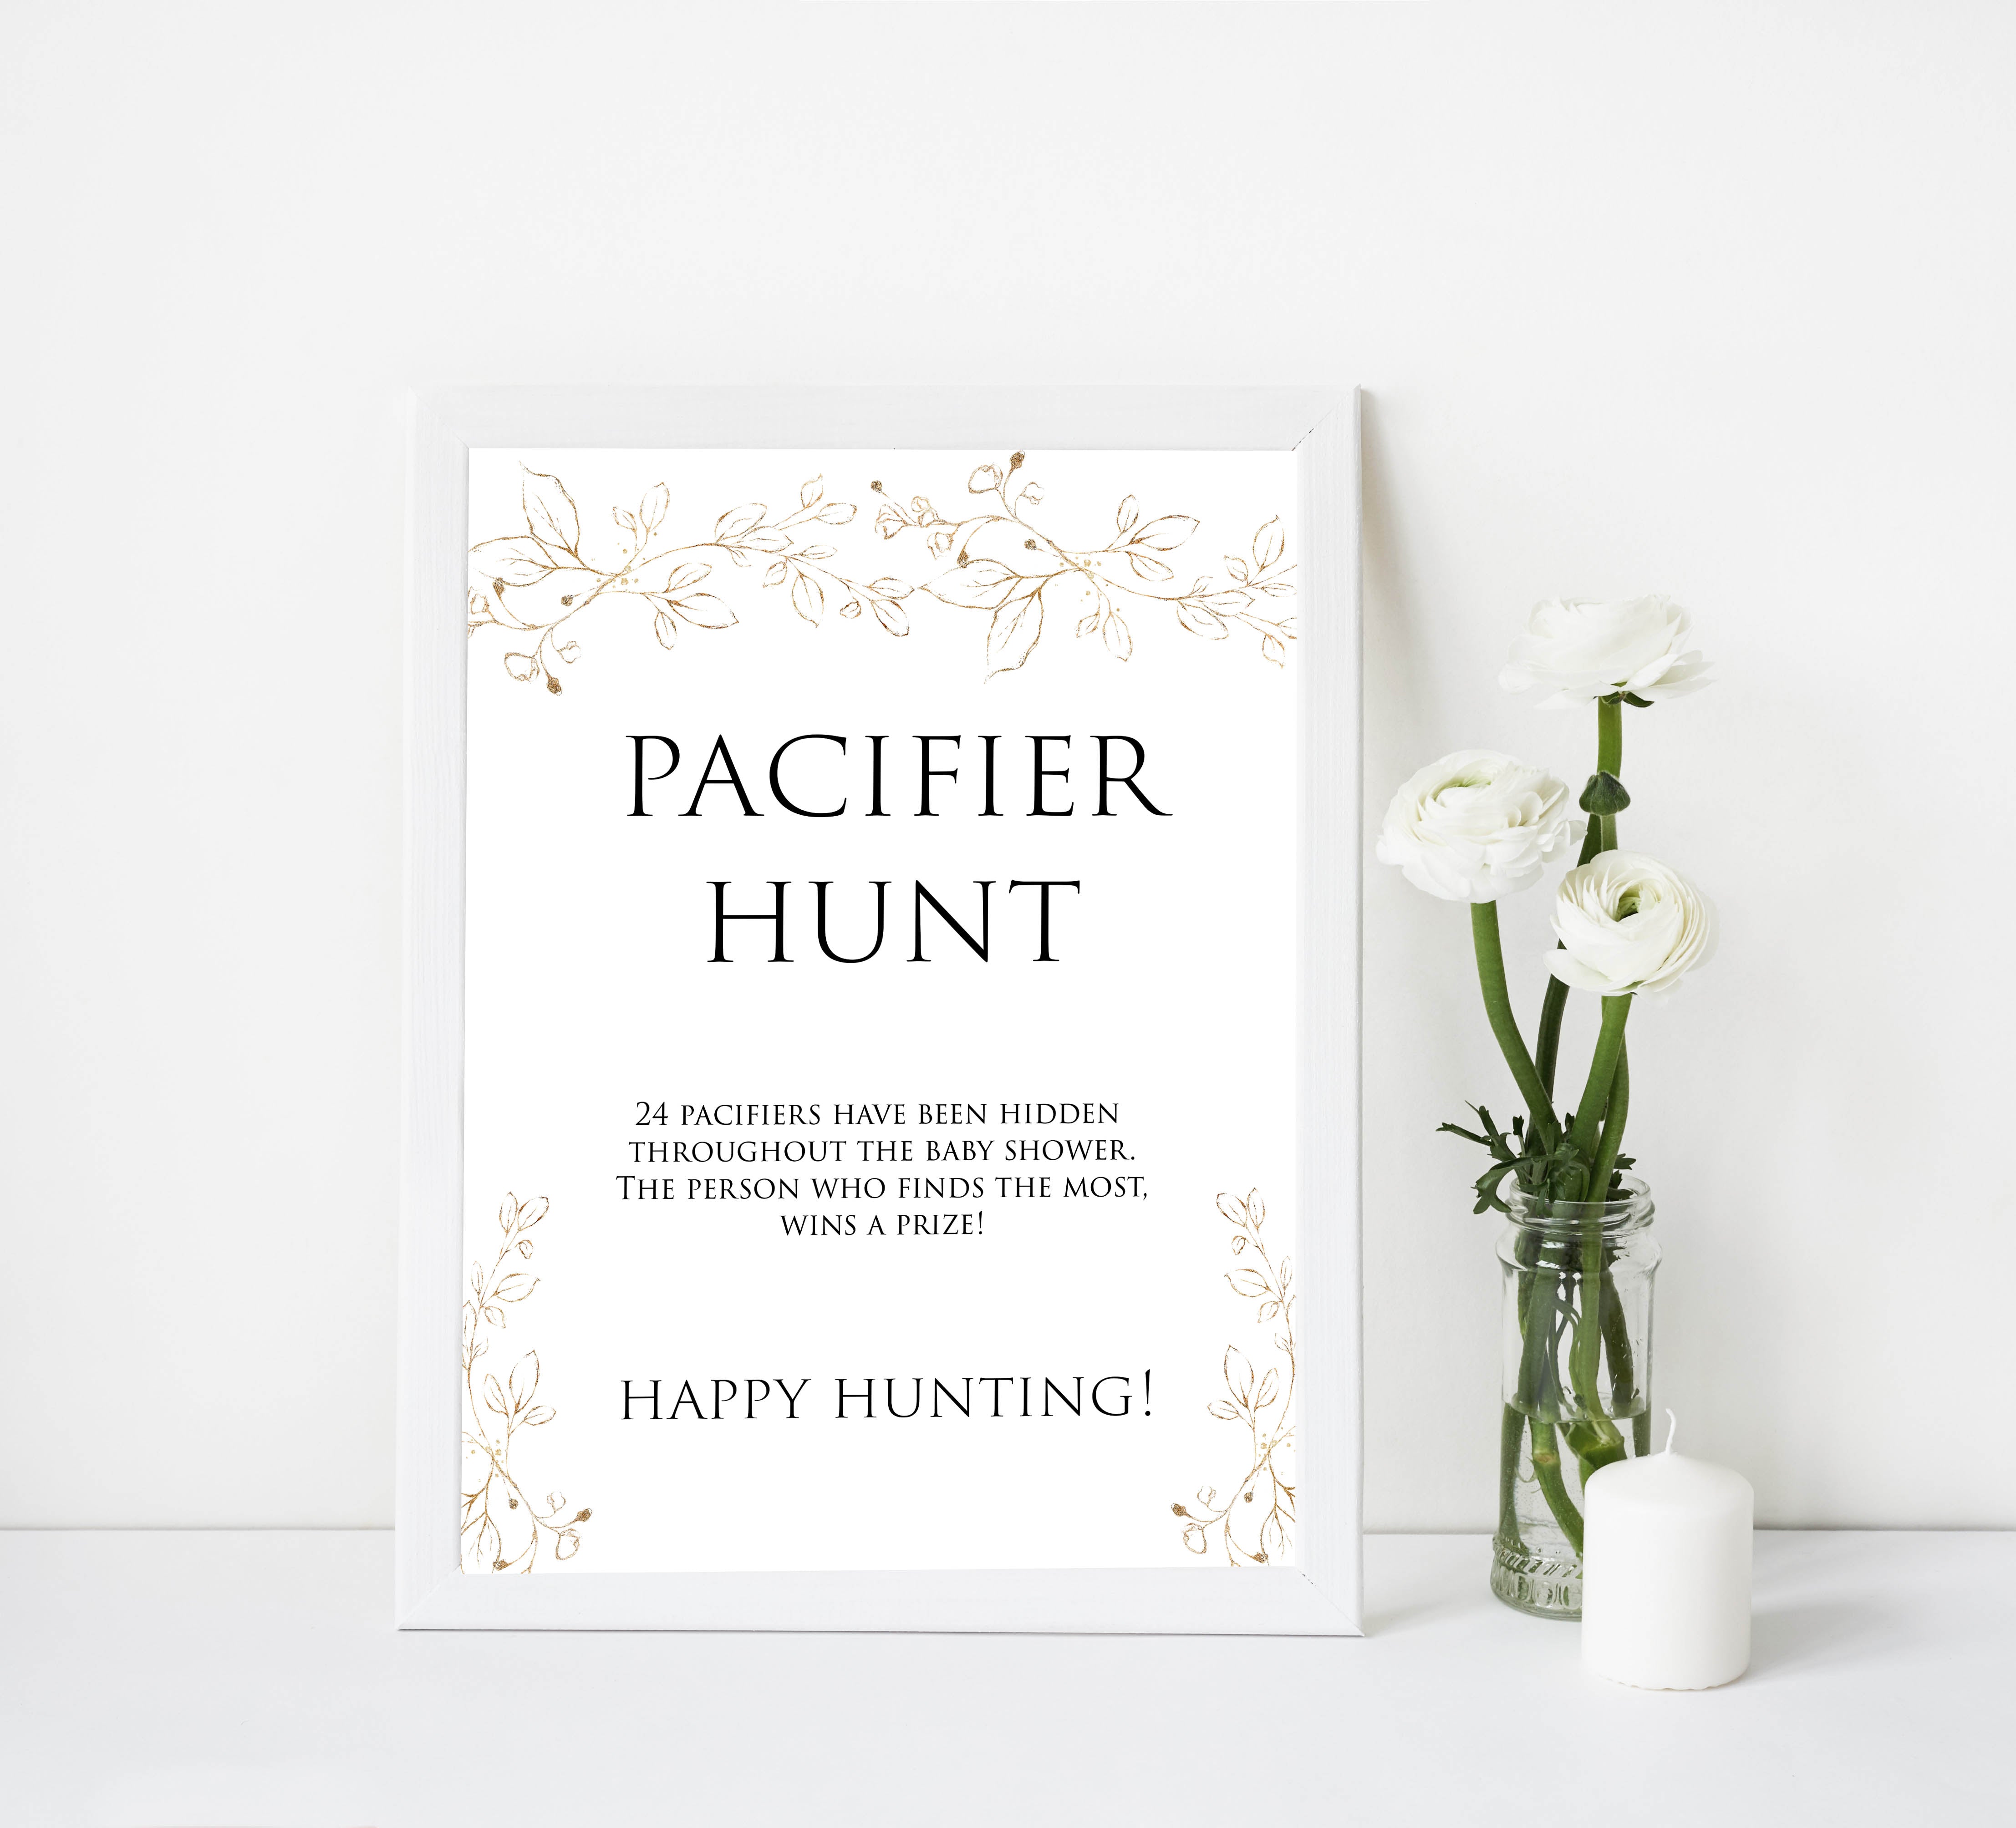 pacifier hunt baby shower game, Printable baby shower games, gold leaf baby games, baby shower games, fun baby shower ideas, top baby shower ideas, gold leaf baby shower, baby shower games, fun gold leaf baby shower ideas